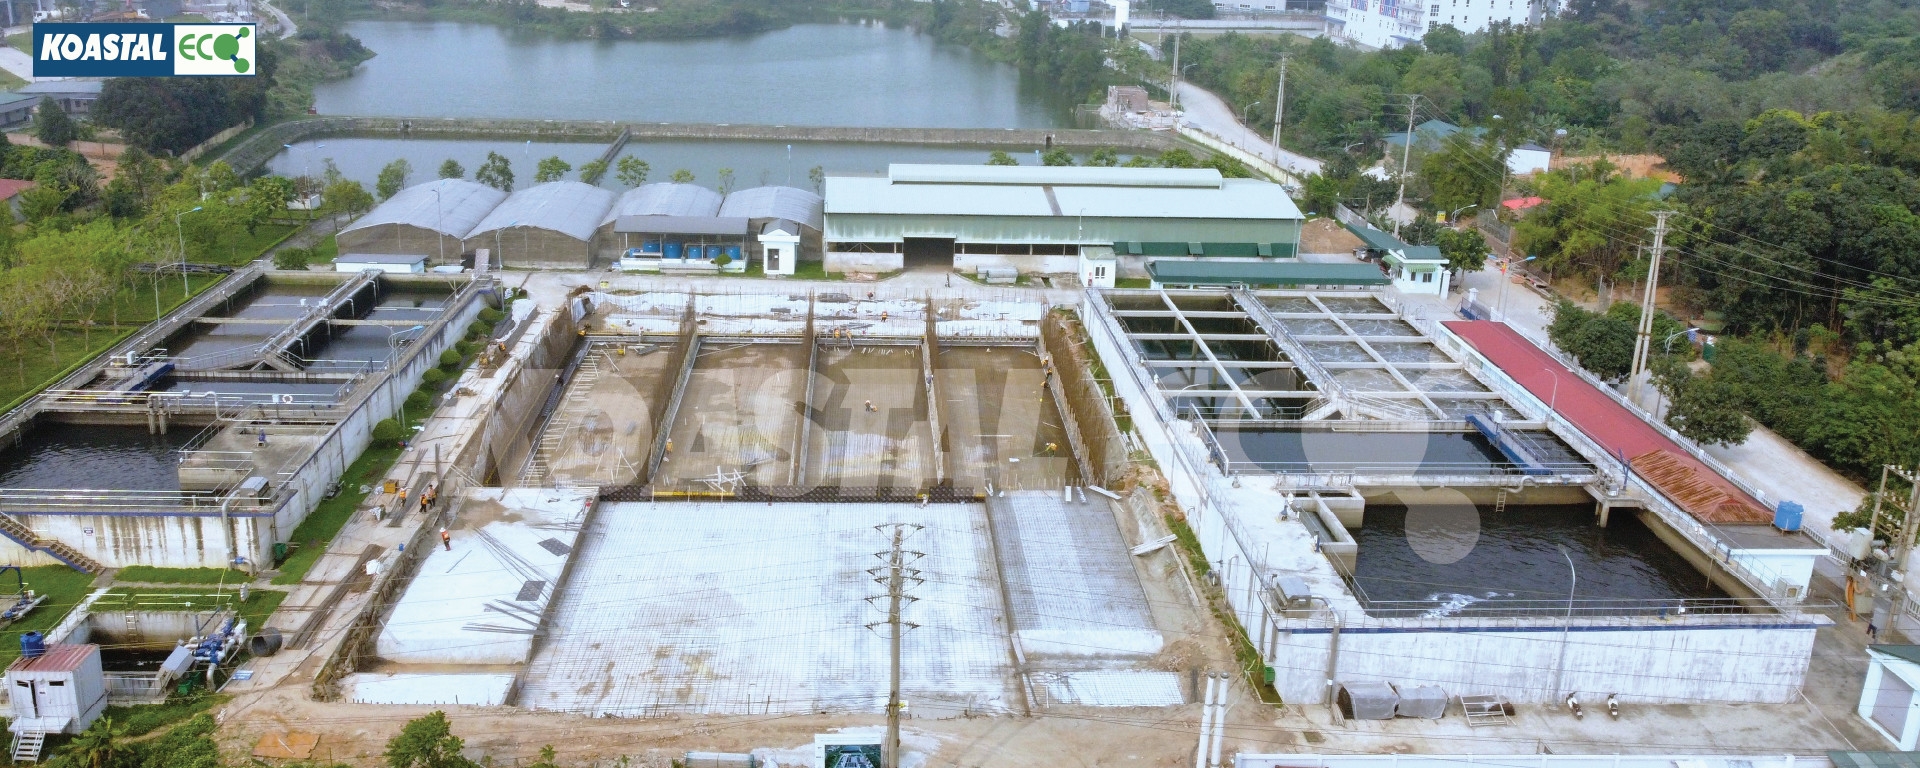 The centralized wastewater treatment plant of Khai Quang Industrial Park